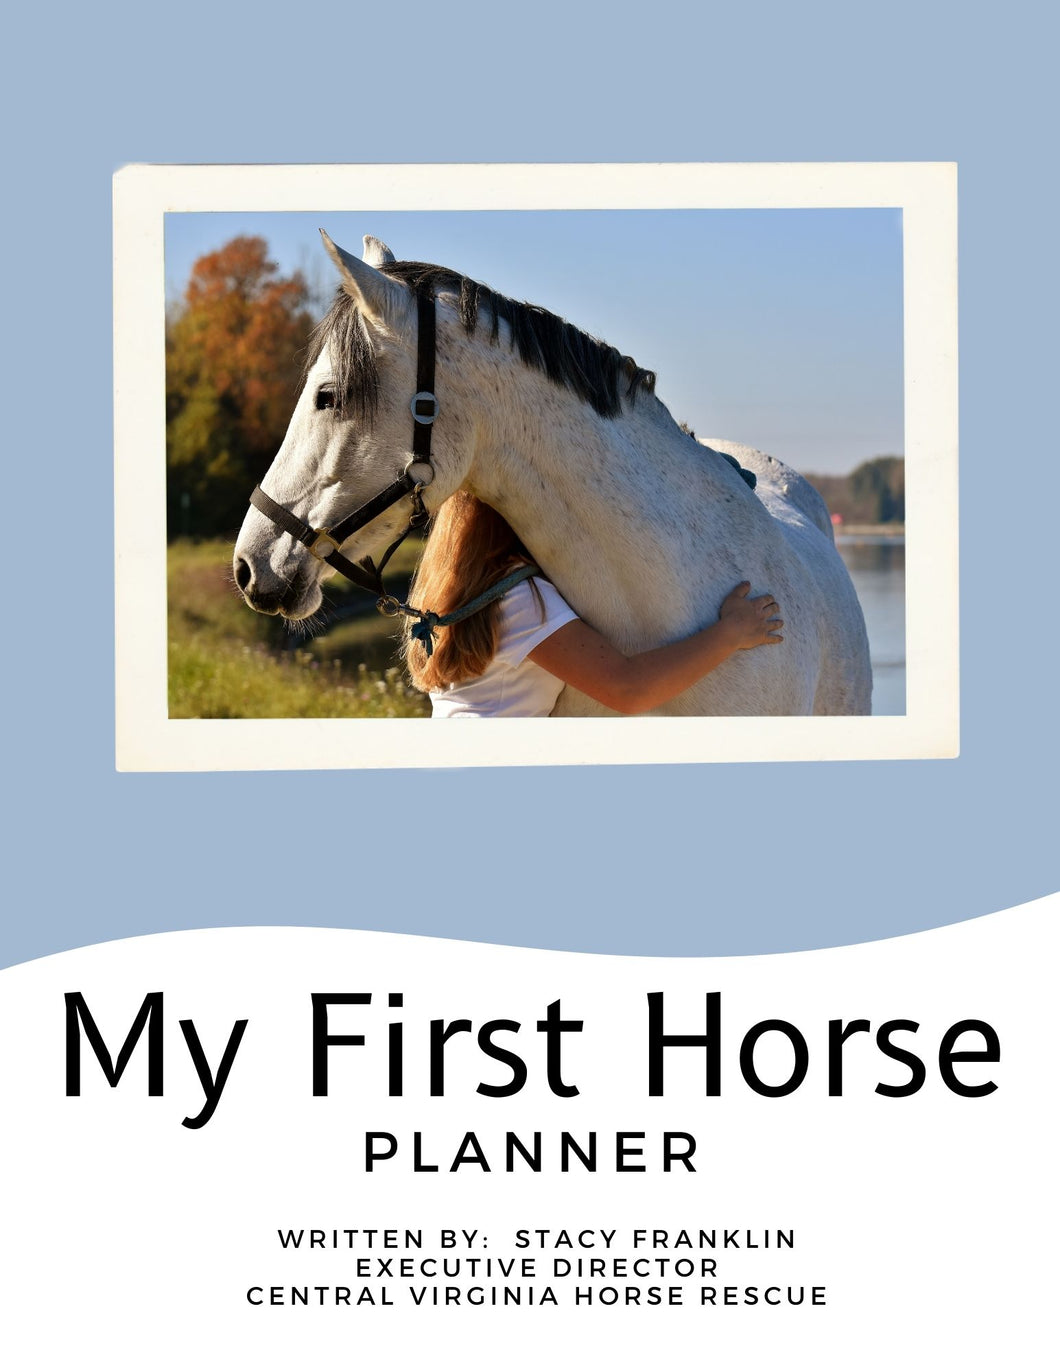 My First Horse Planner